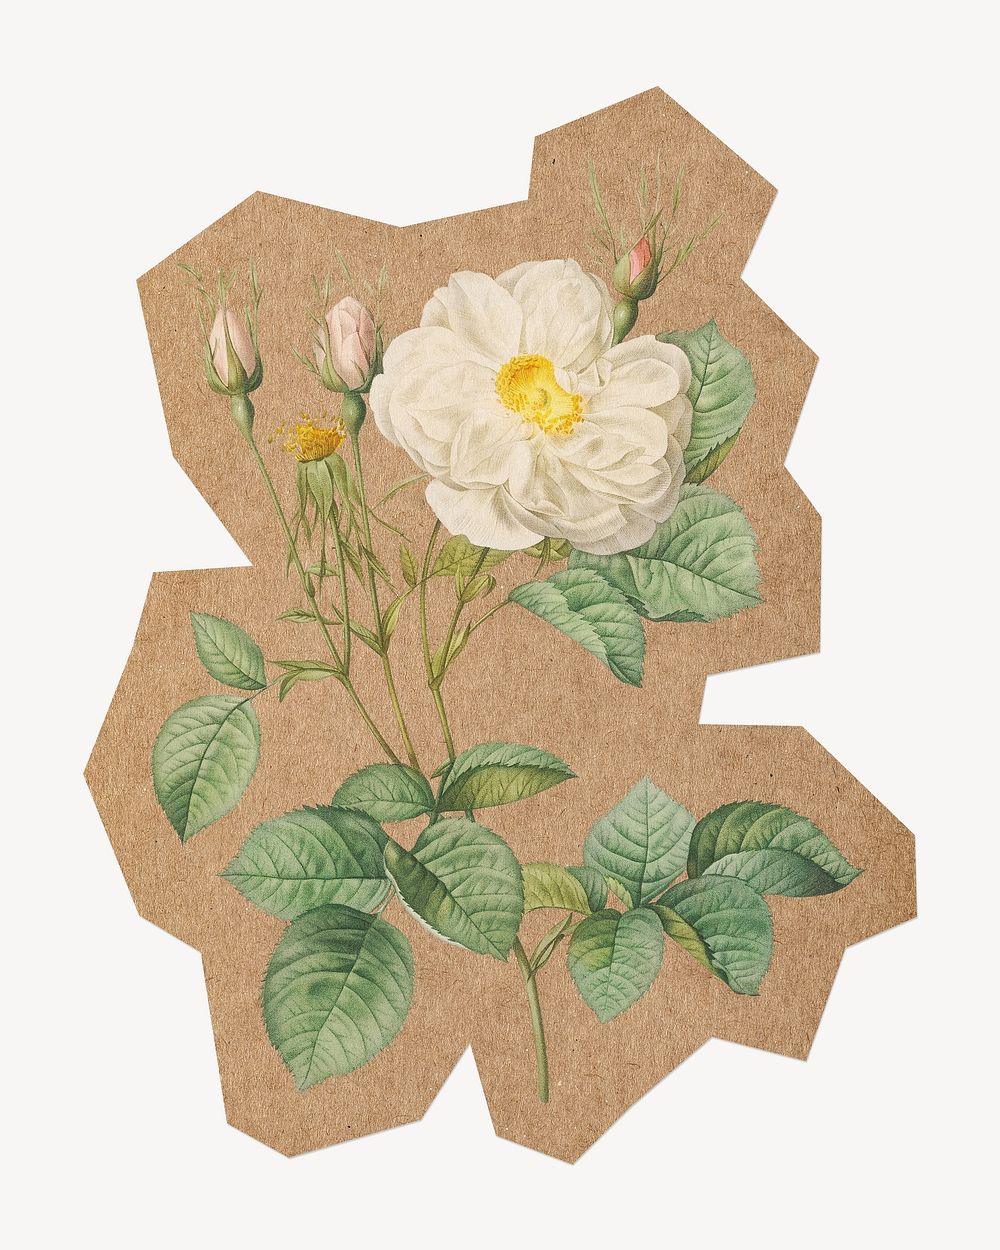 Vintage white rose, cut out paper element. Artwork from Pierre Joseph Redouté remixed by rawpixel.